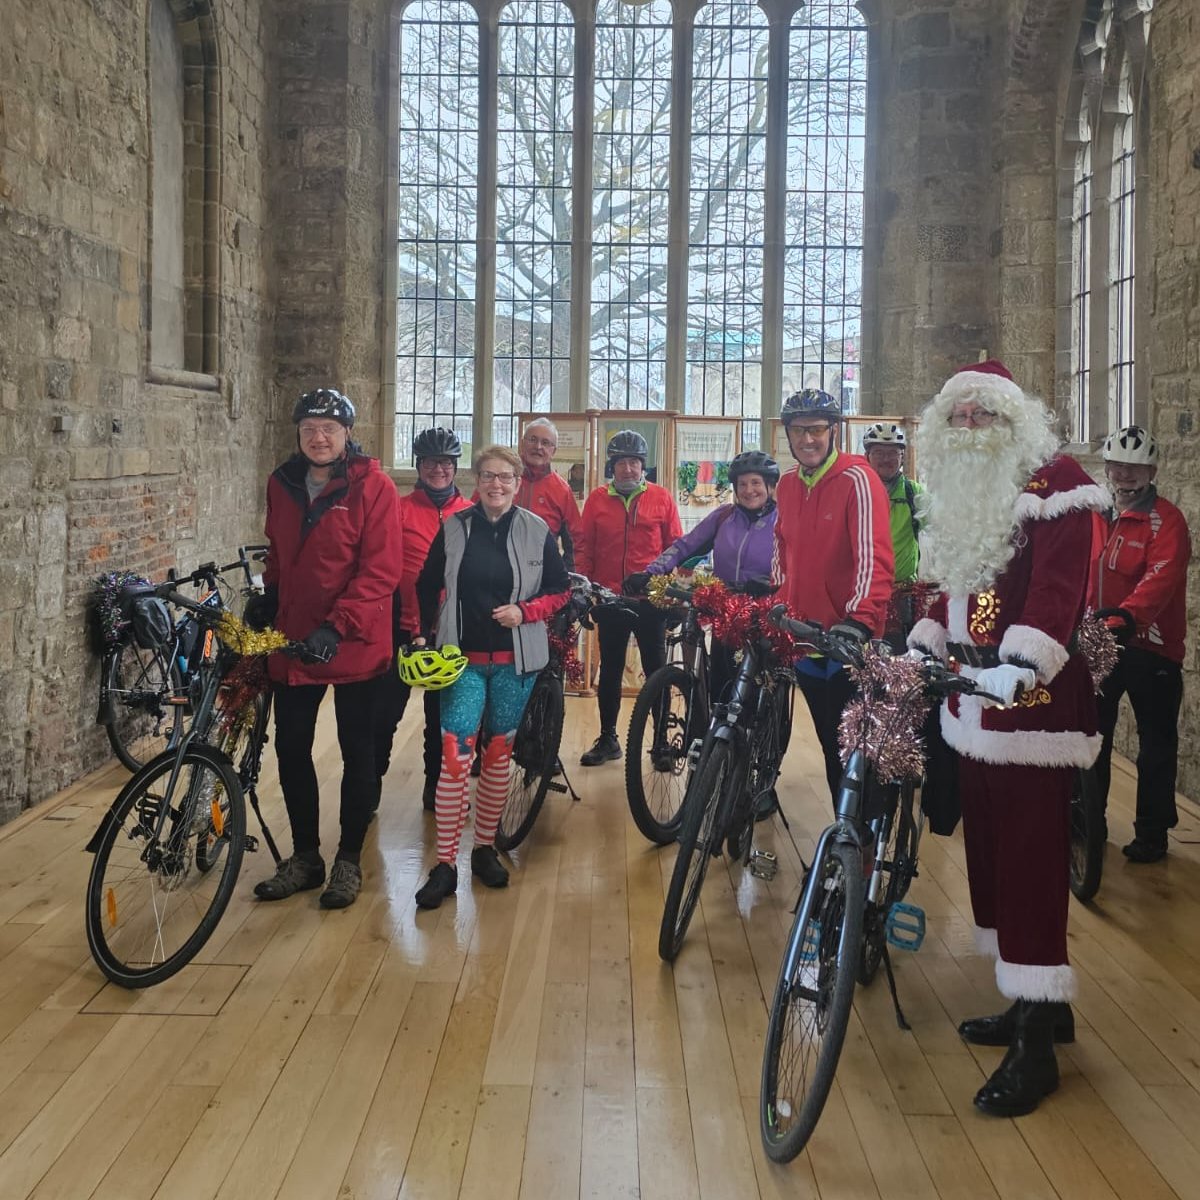 Fancy cycling the Tyne Derwent Way? Jump on your bike and meet Teams Wheelers Community Cycle Club* at 10am on Thursday at the Dunston Staiths #tynederwentway *Santa will not be present - although he did swing by St Mary's in December so Teams Wheelers must be on the 'nice' list